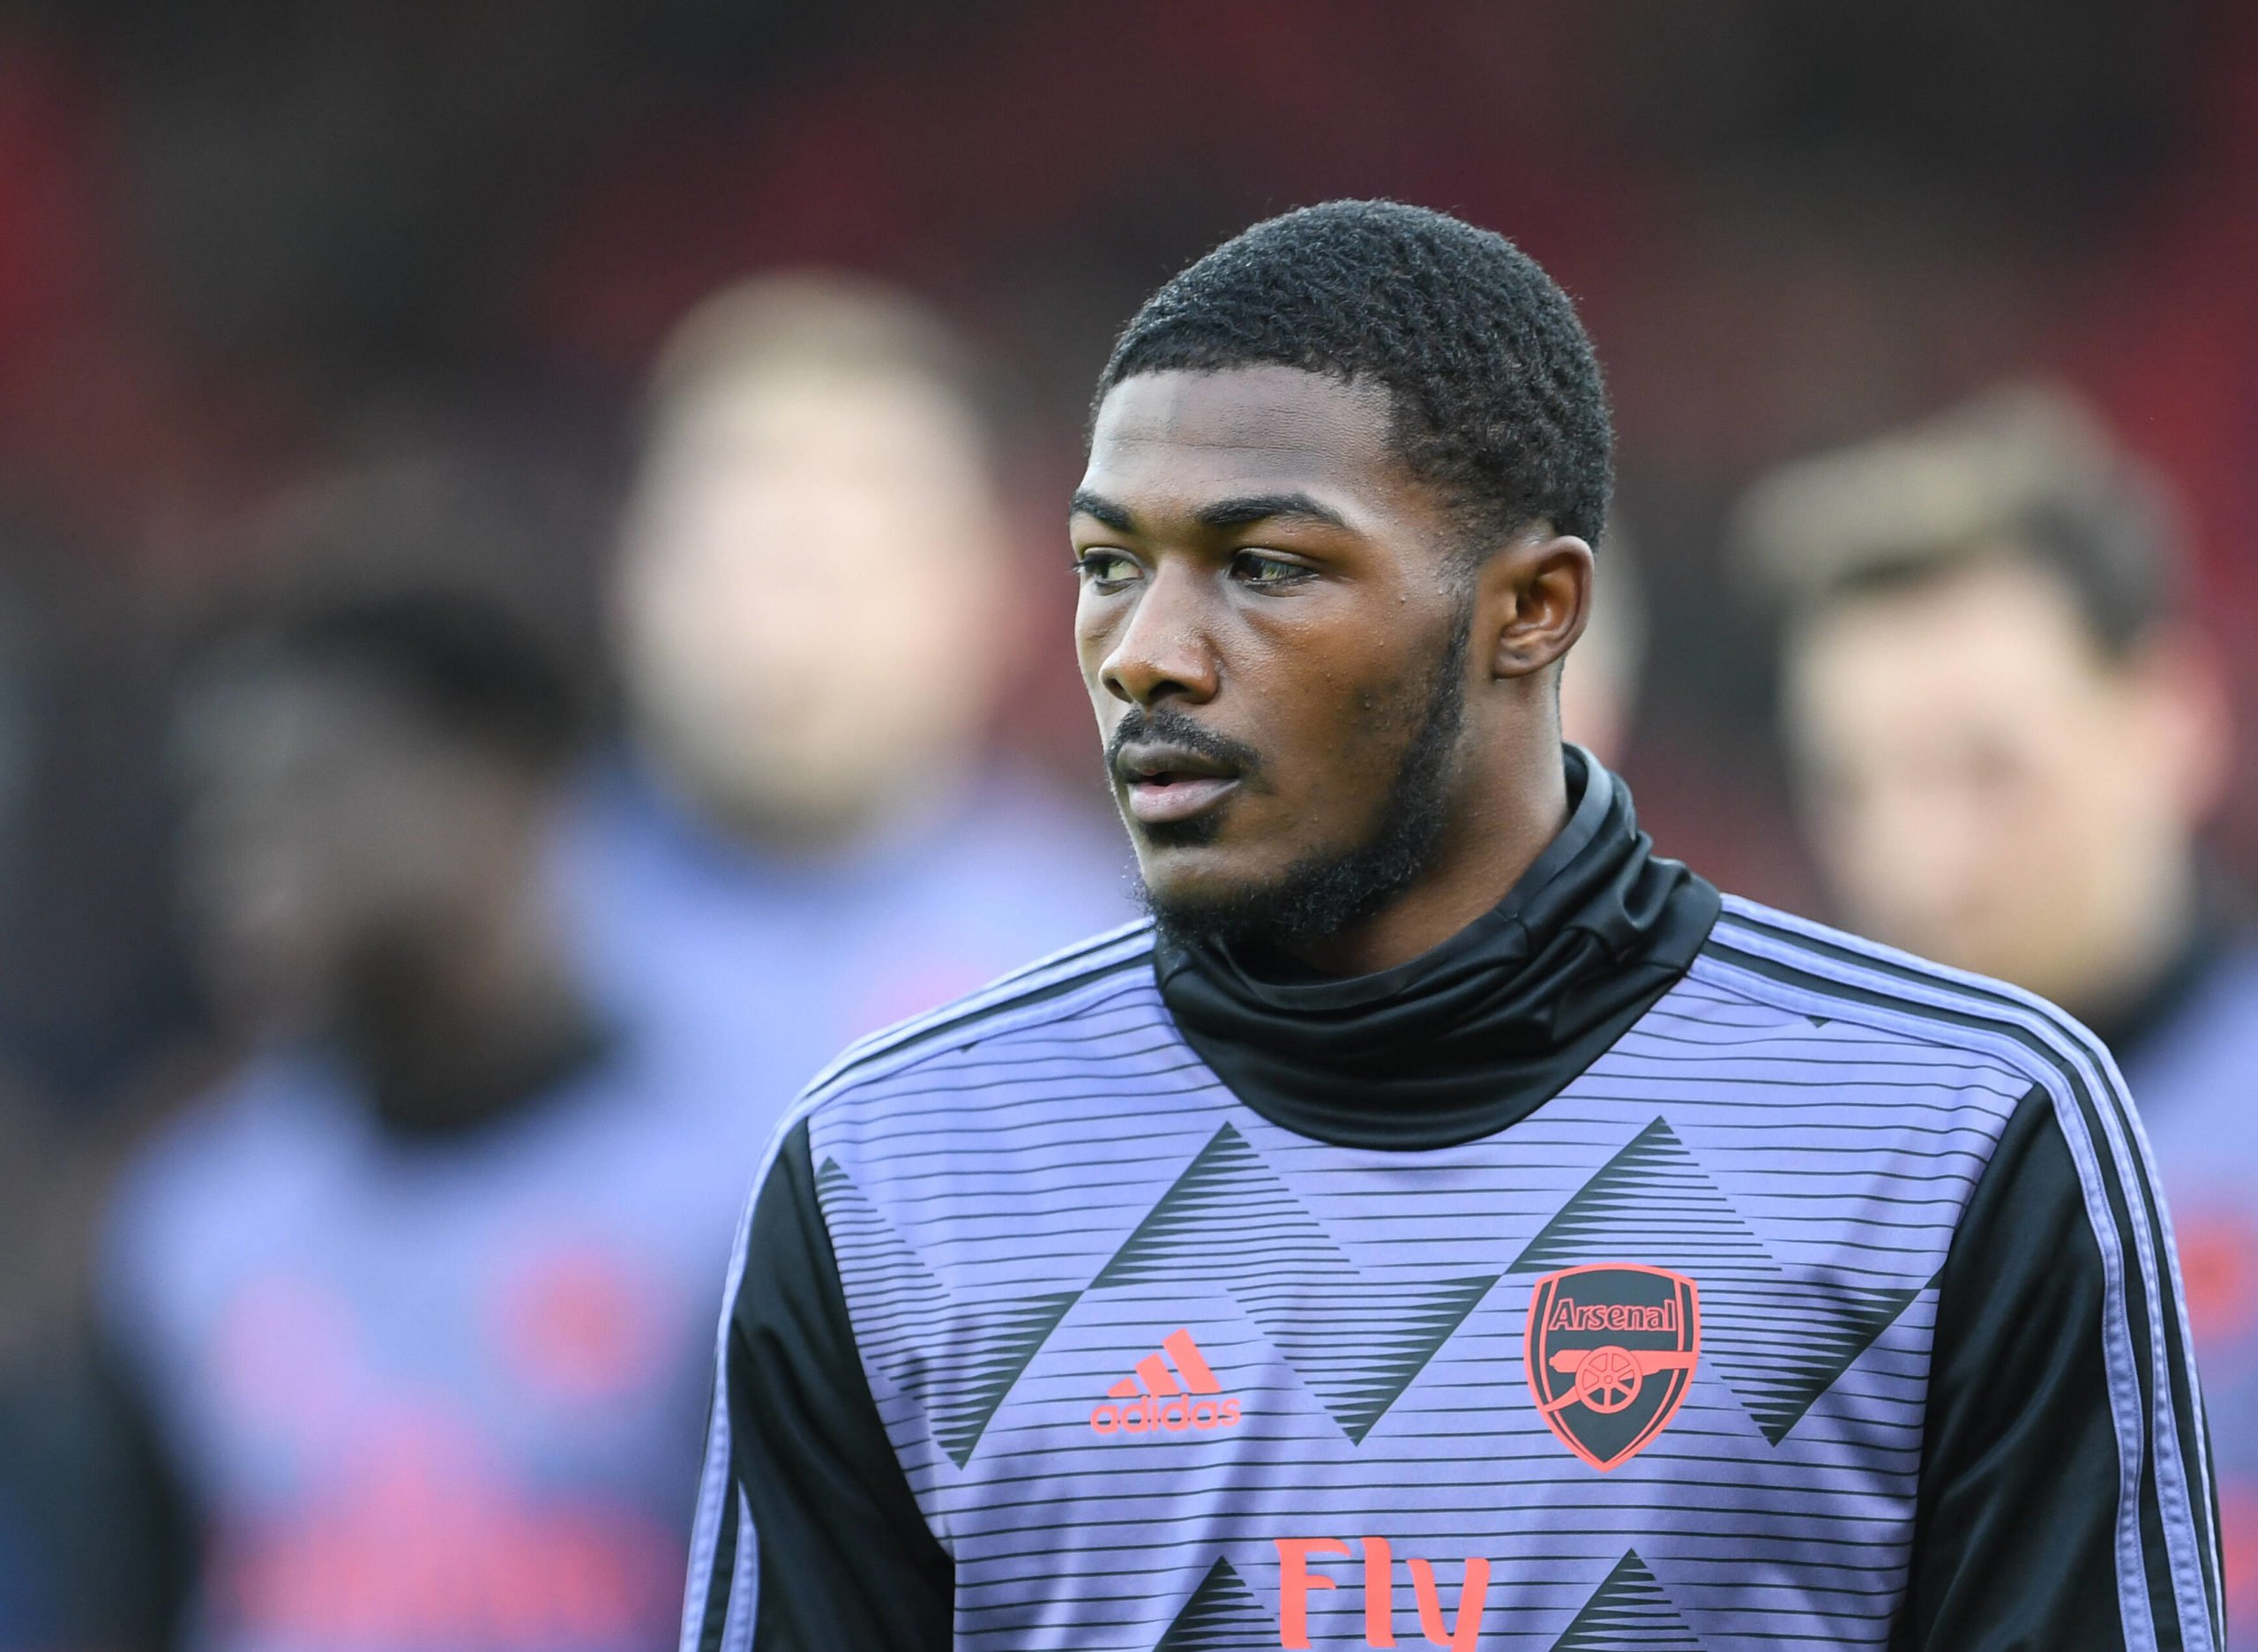 Tottenham are interested in Arsenal's Ainsley Maitland-Niles - A shock target.